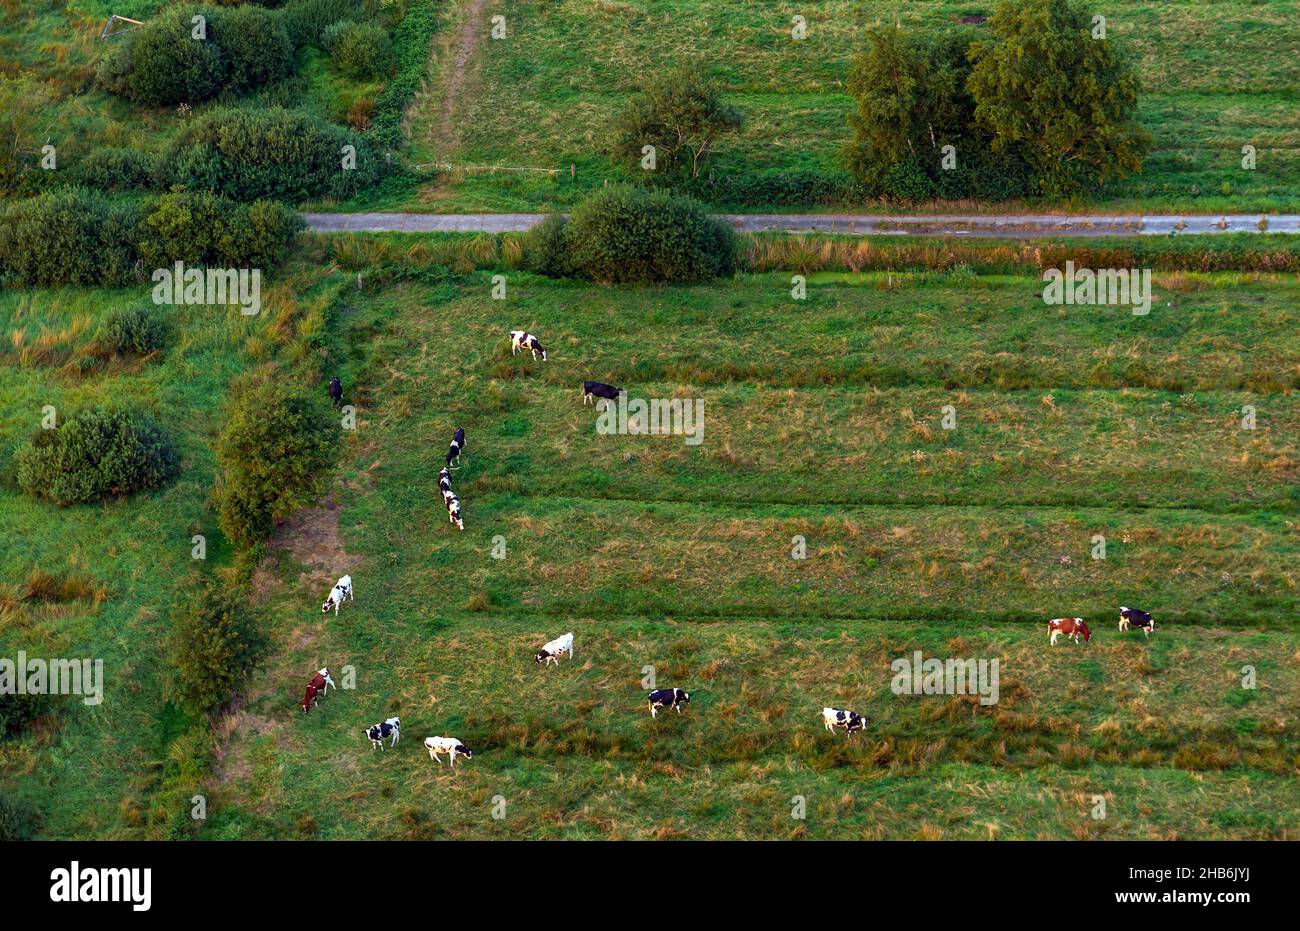 domestic cattle (Bos primigenius f. taurus), herd of cattle on a pasture, aerial view, Germany, Schleswig-Holstein, Dithmarschen Stock Photo